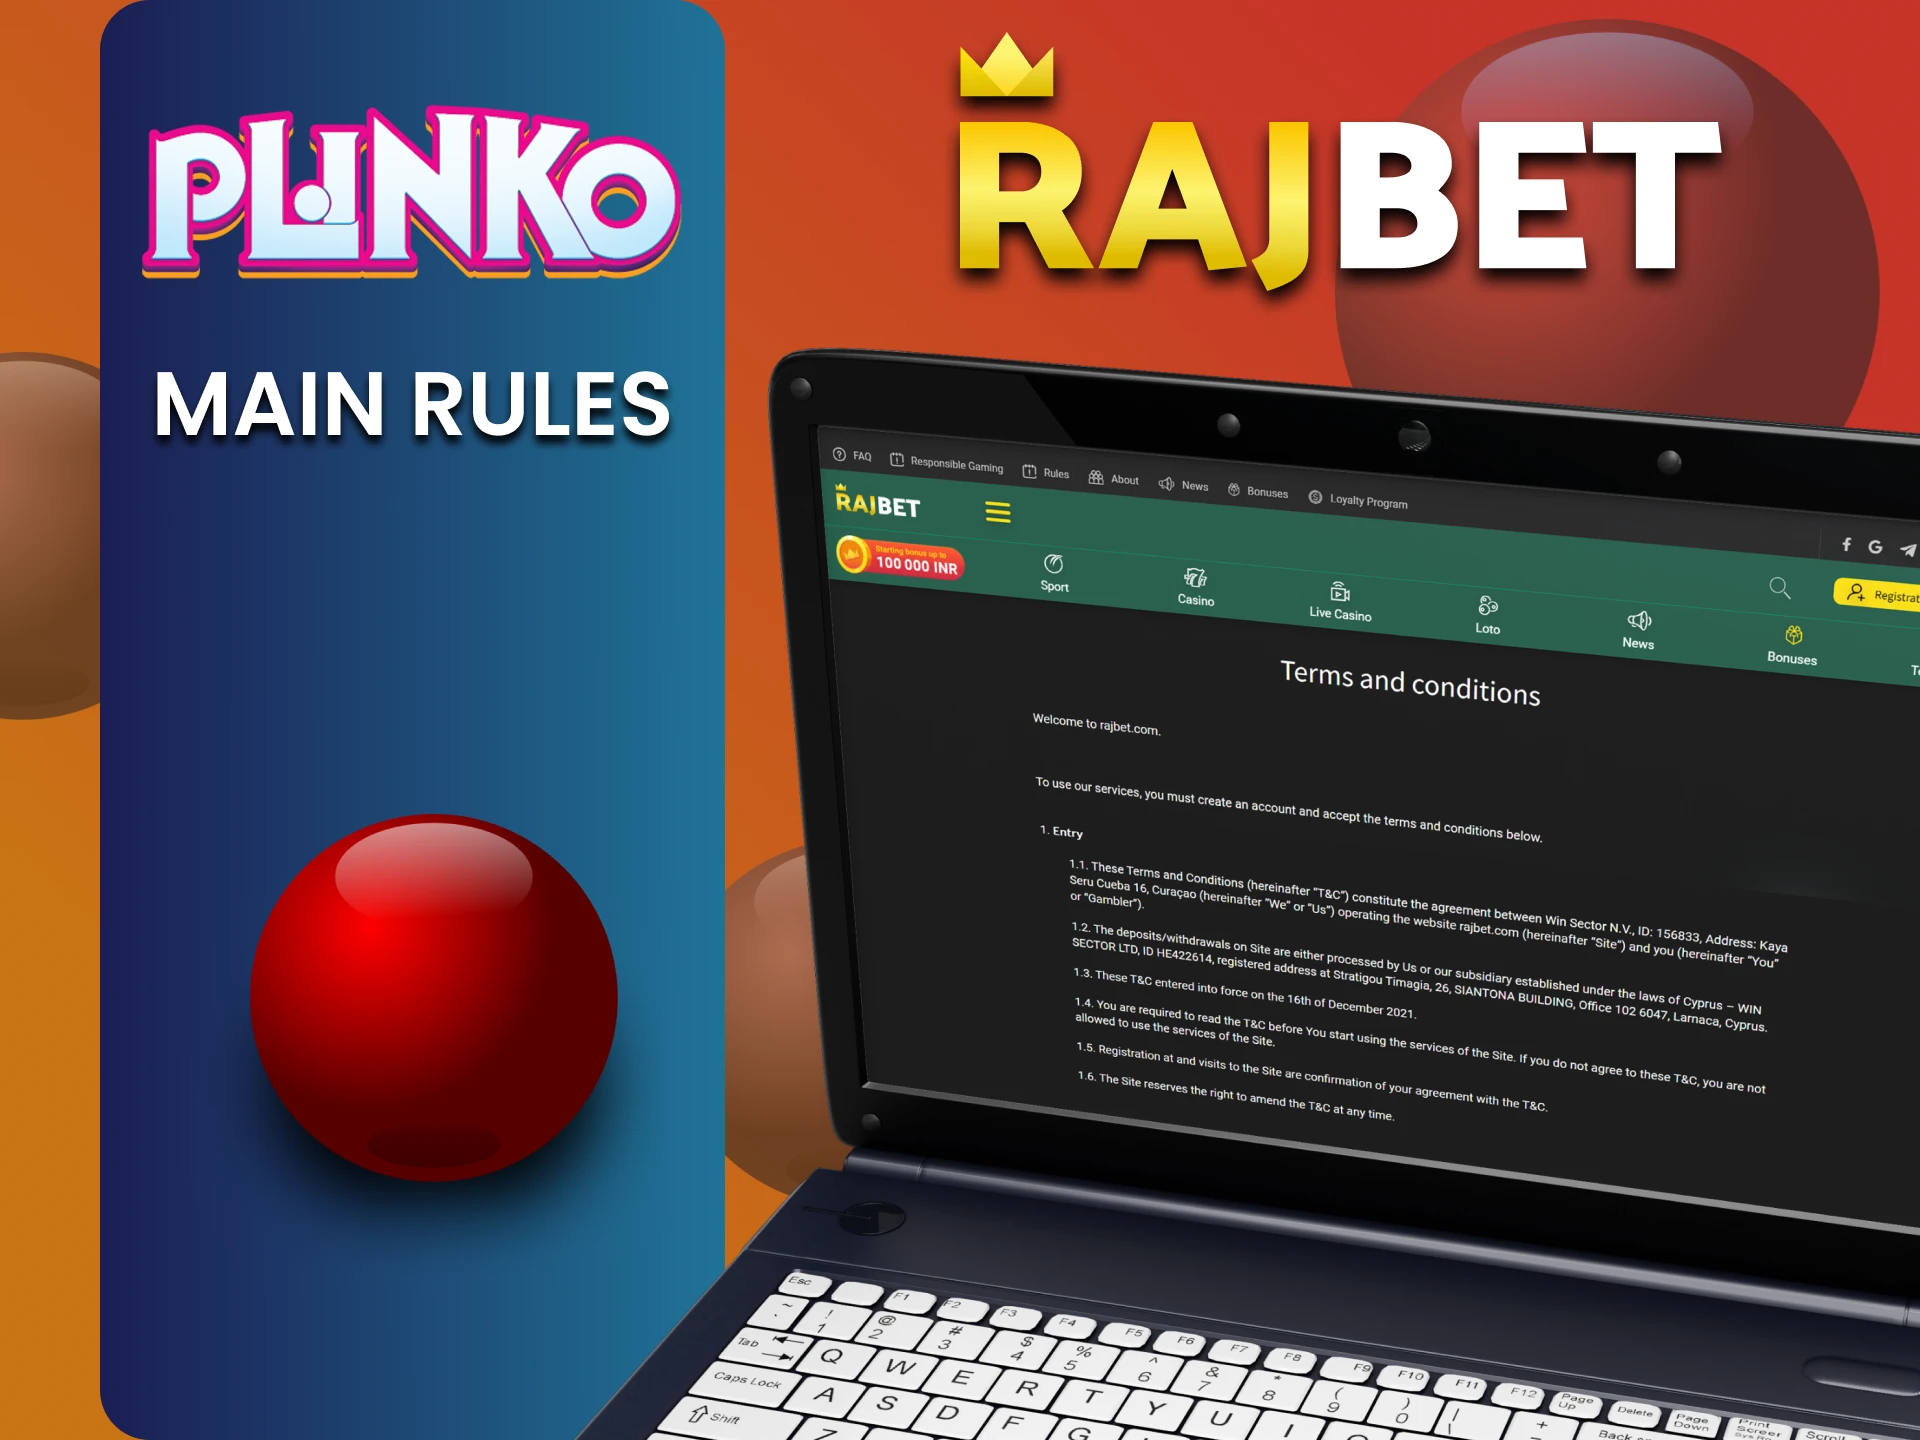 Learn the Rajbet rules for playing Plinko.